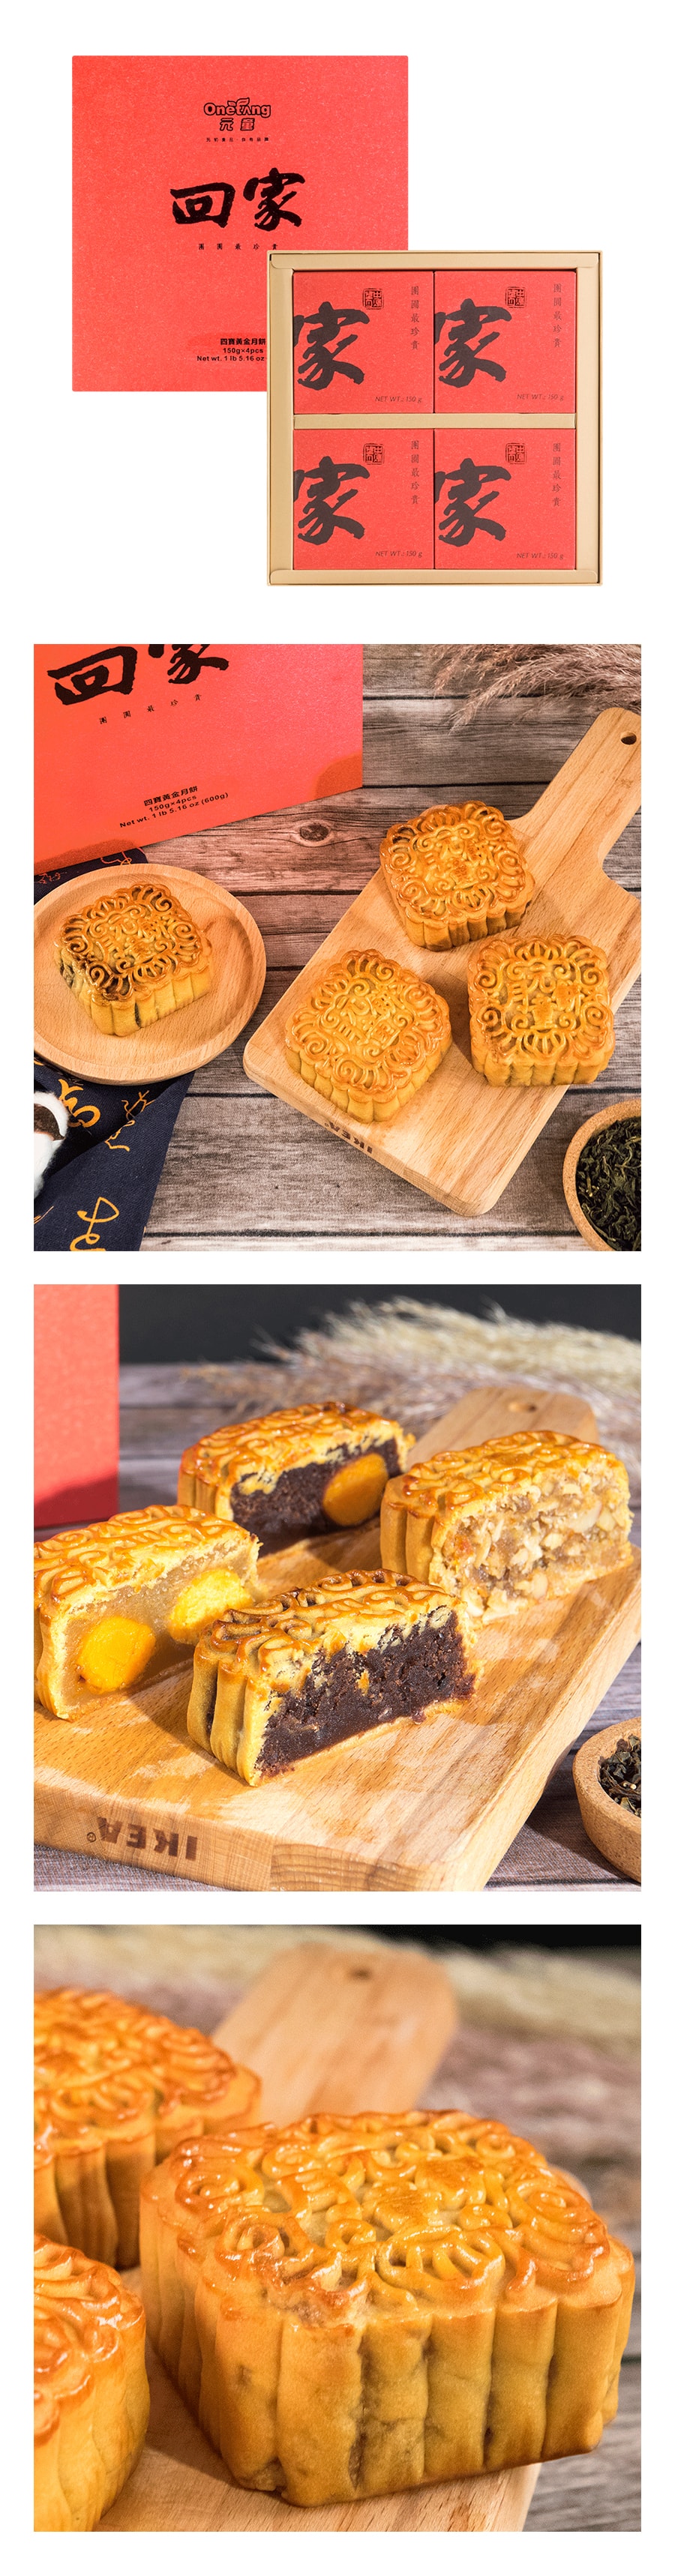 ONETONG Exclusive Selection Mooncakes 4pcs 600g 【Delivery Date: End of August】